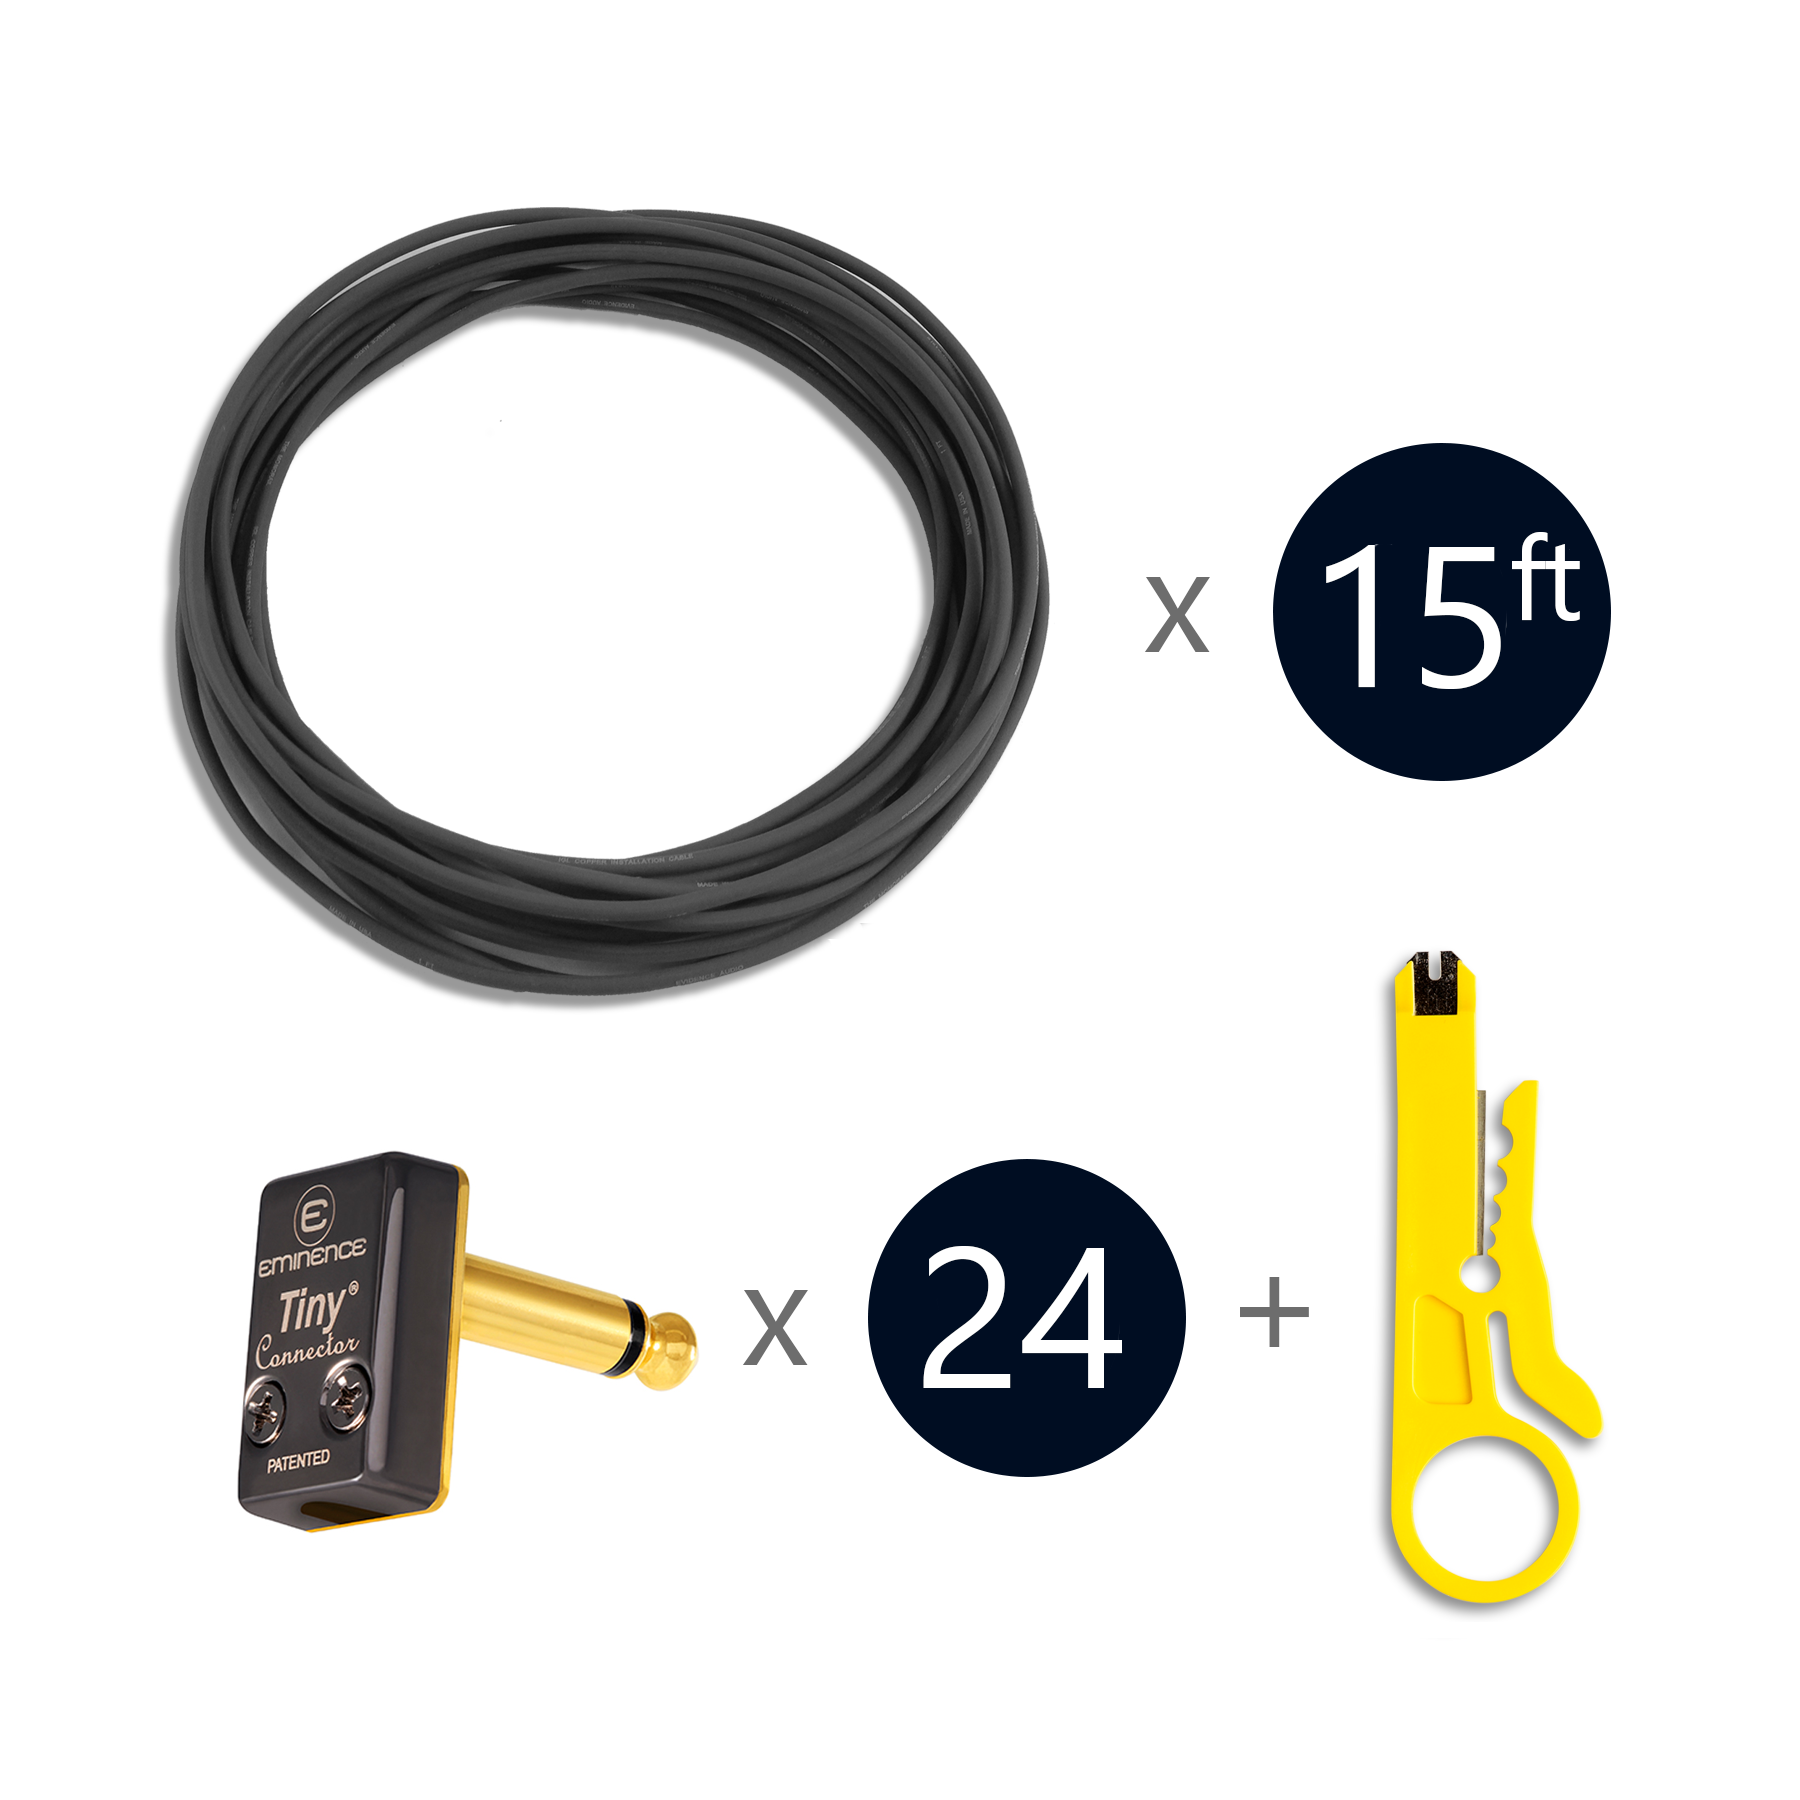 15 ft Evidence Audio Monorail cable + 24 x Eminence Tiny connector Plug + cable cutter tool